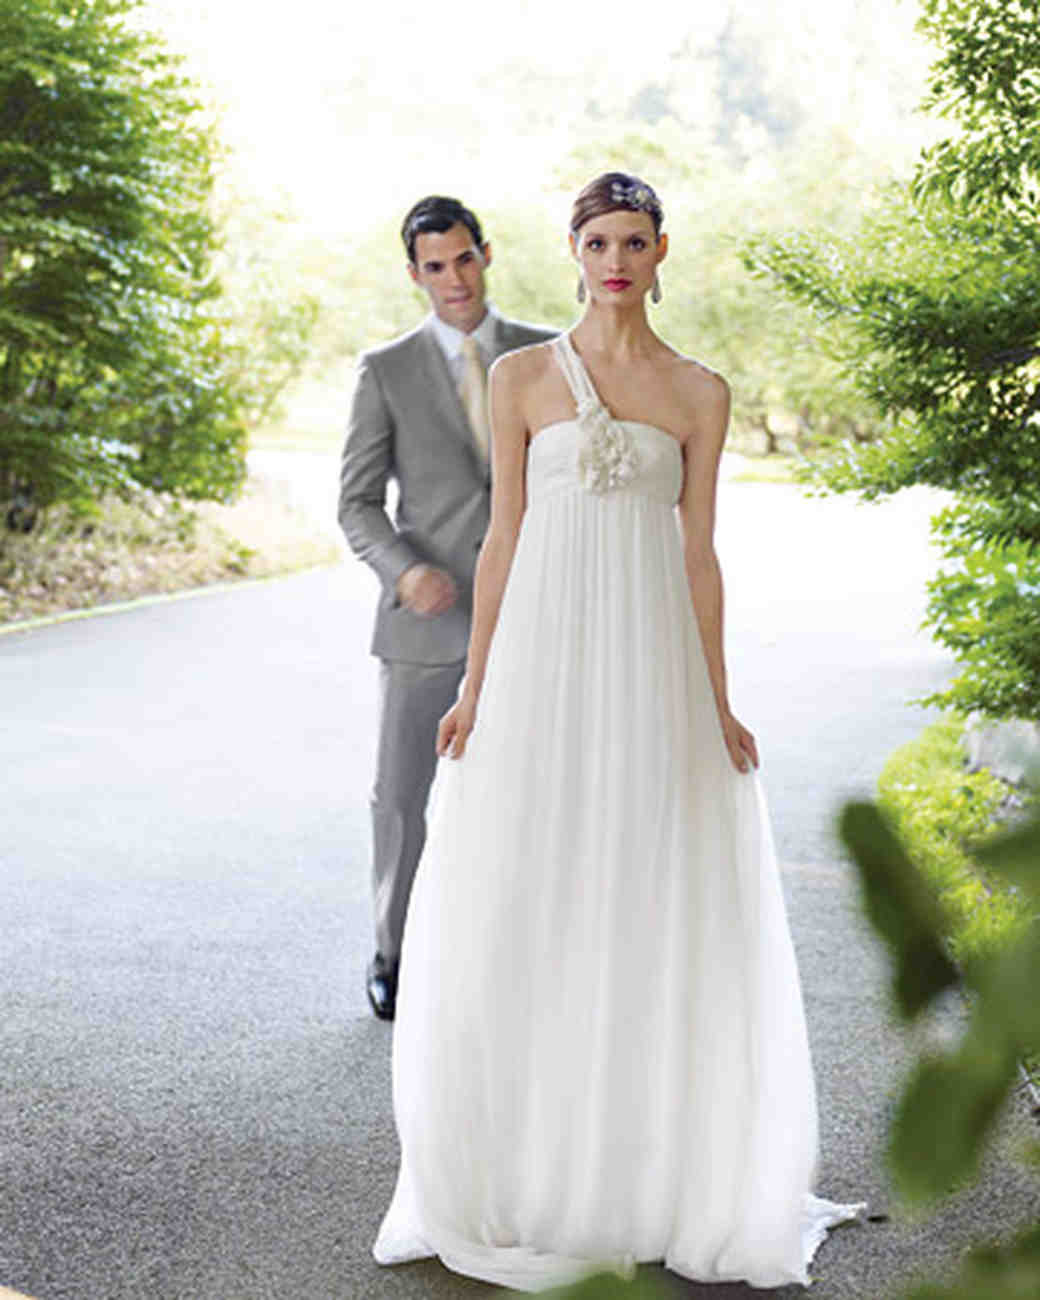 Outdoor Wedding Dresses
 Perfect Gowns for an Outdoor Wedding